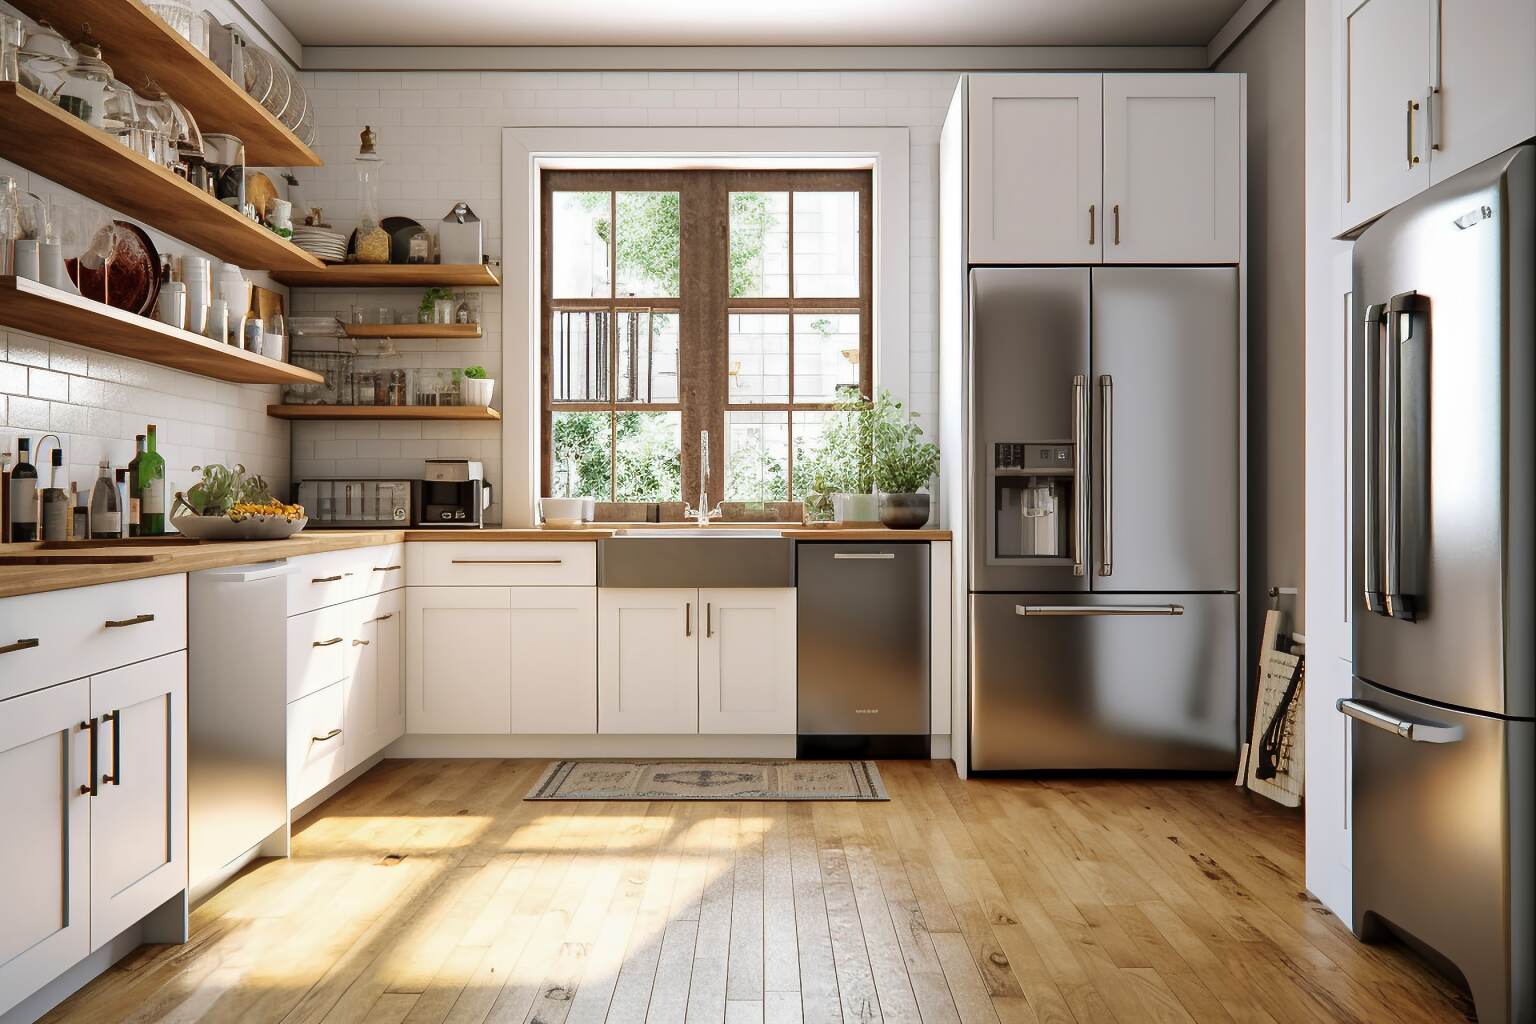 Snapshot Of A Scandinavian Style Kitchen With Reclaimed Wood